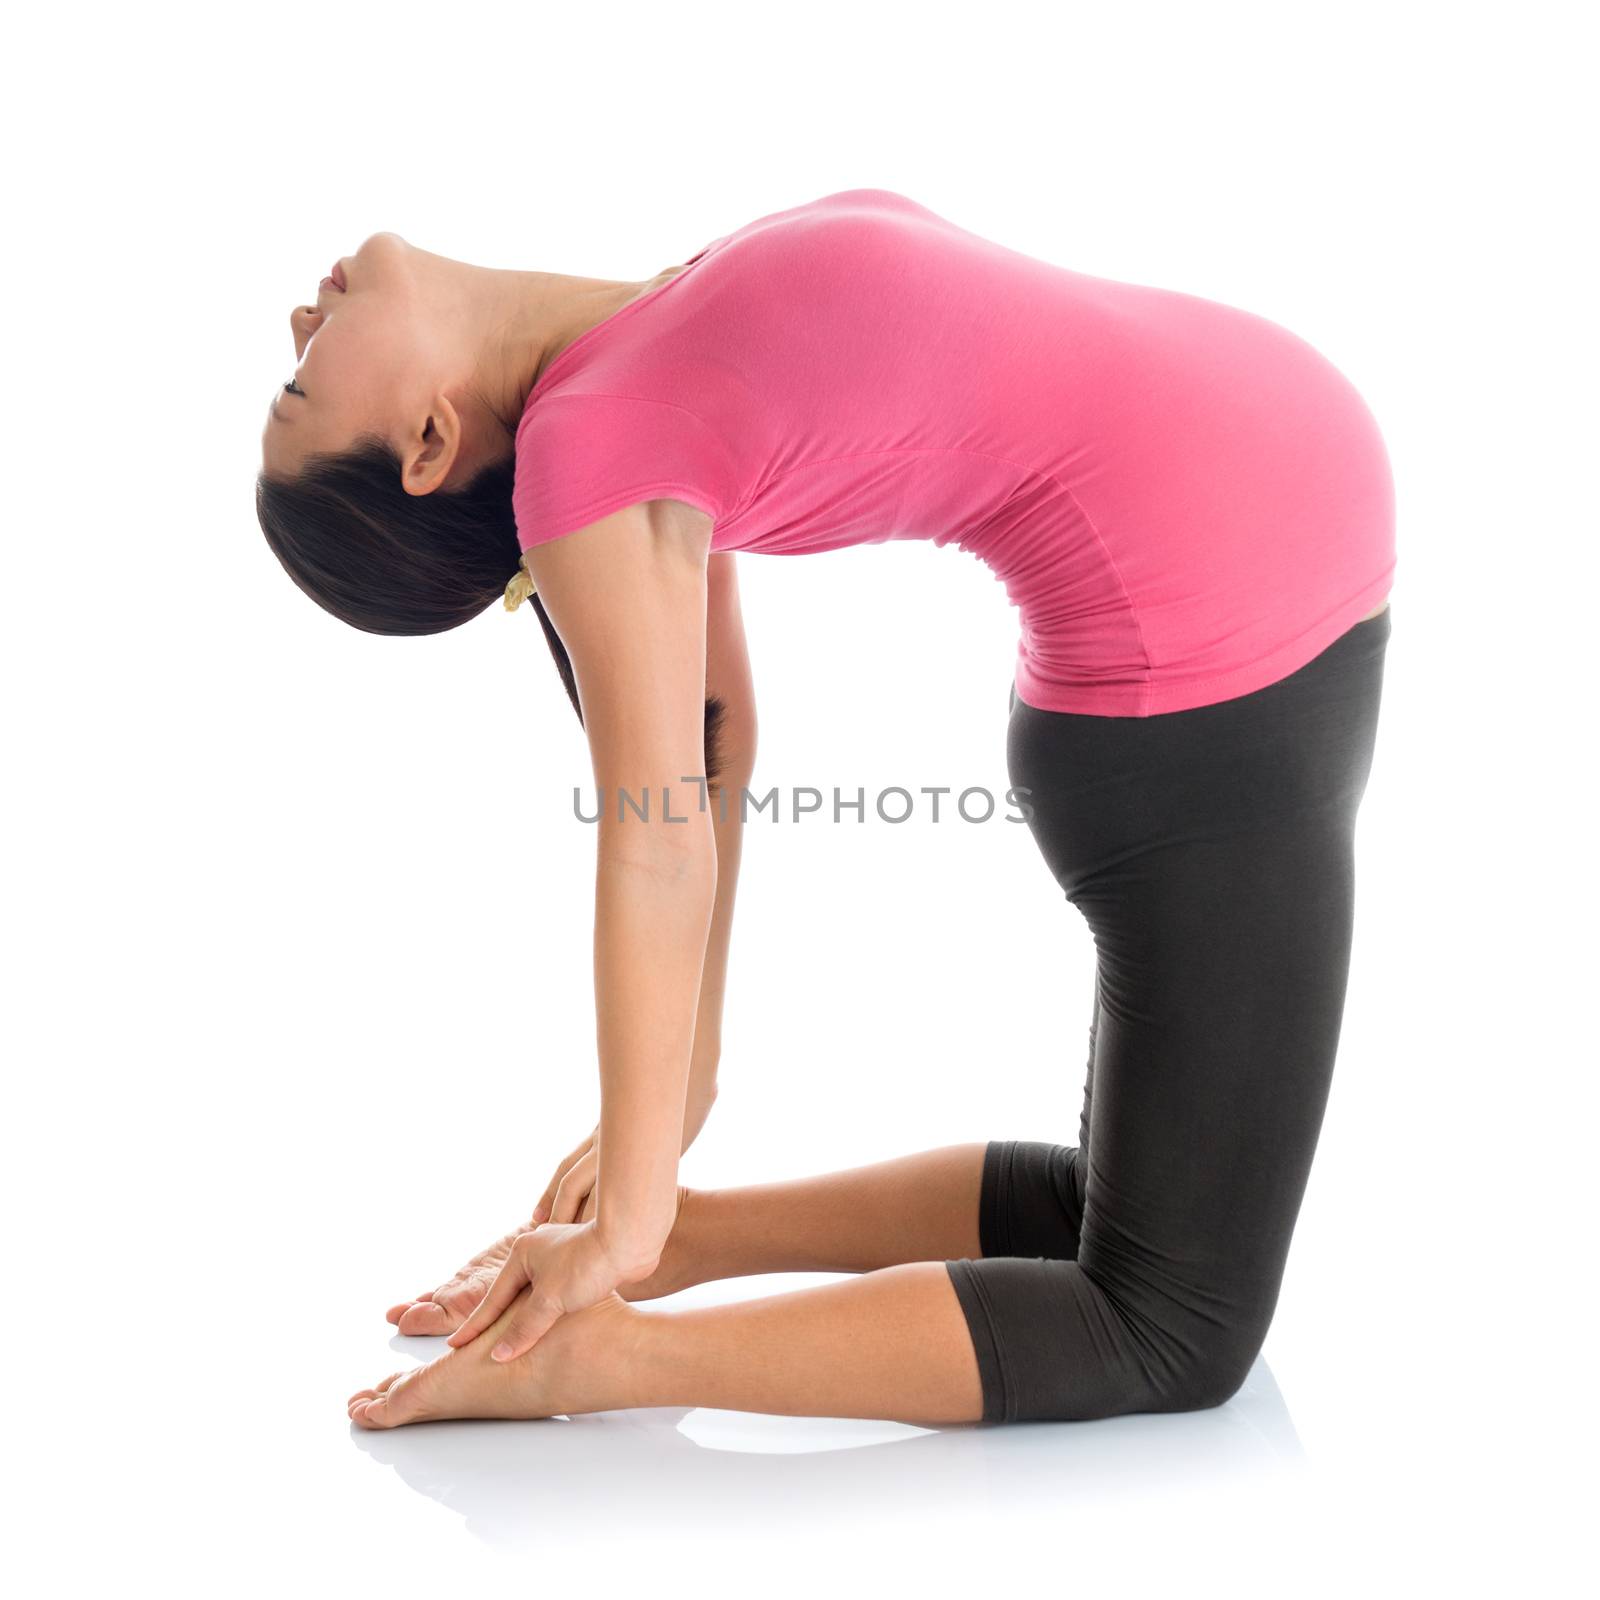 Prenatal yoga meditation. Full length healthy Asian pregnant woman doing yoga exercising stretching at home, fullbody isolated on white background. Yoga camel pose.